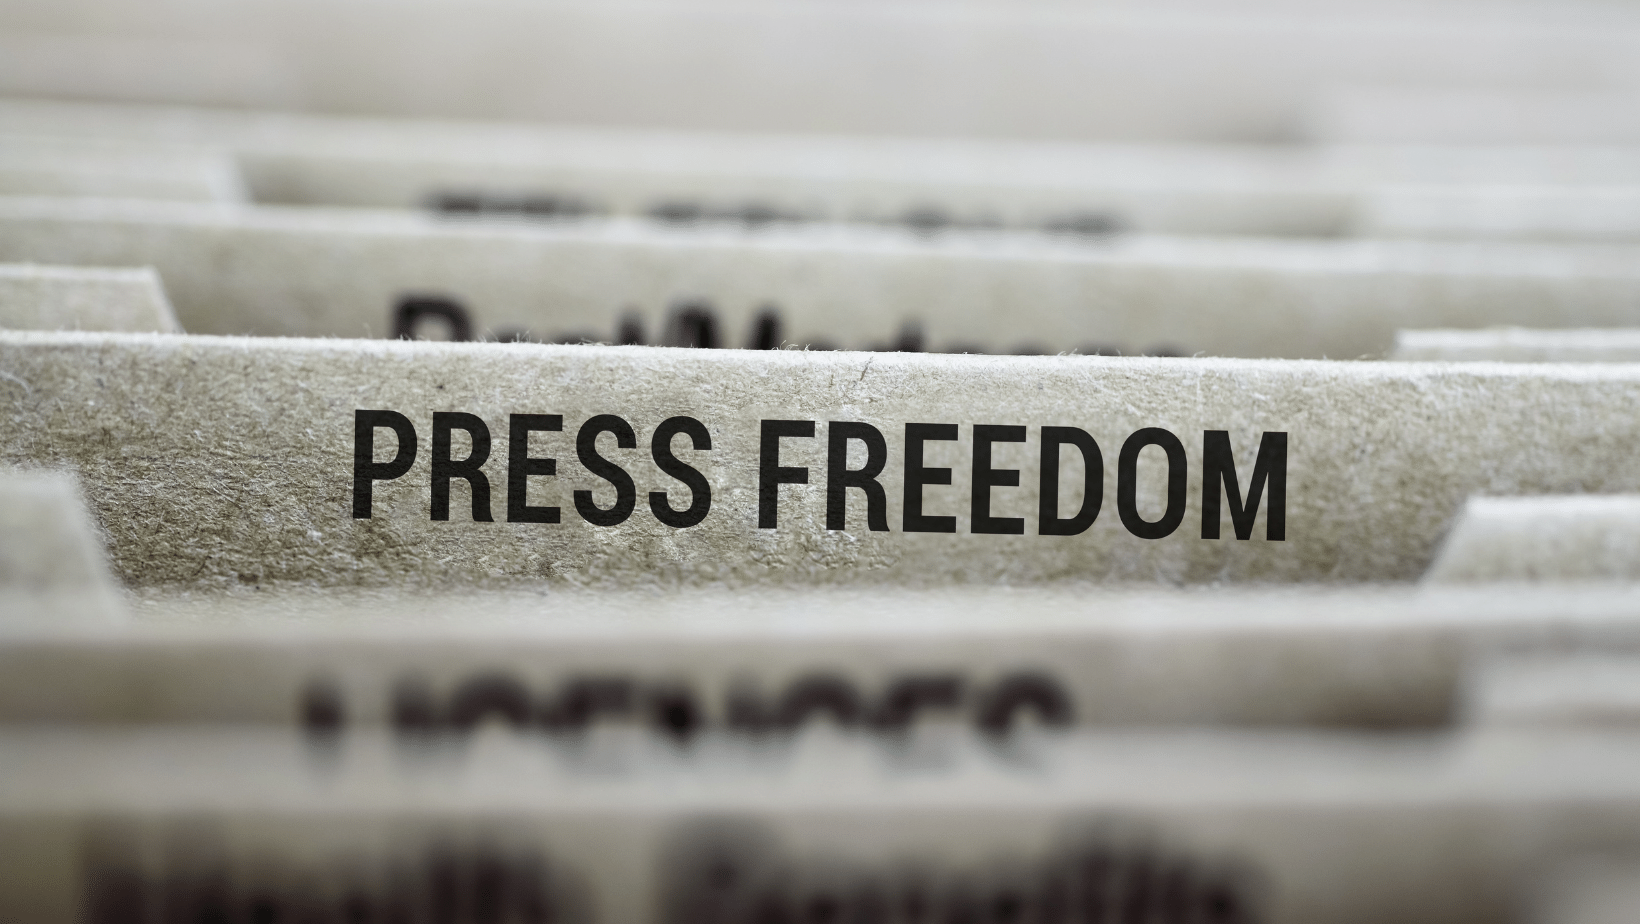 Russias Press Freedom 'Worst Since the Cold War' - Analysts